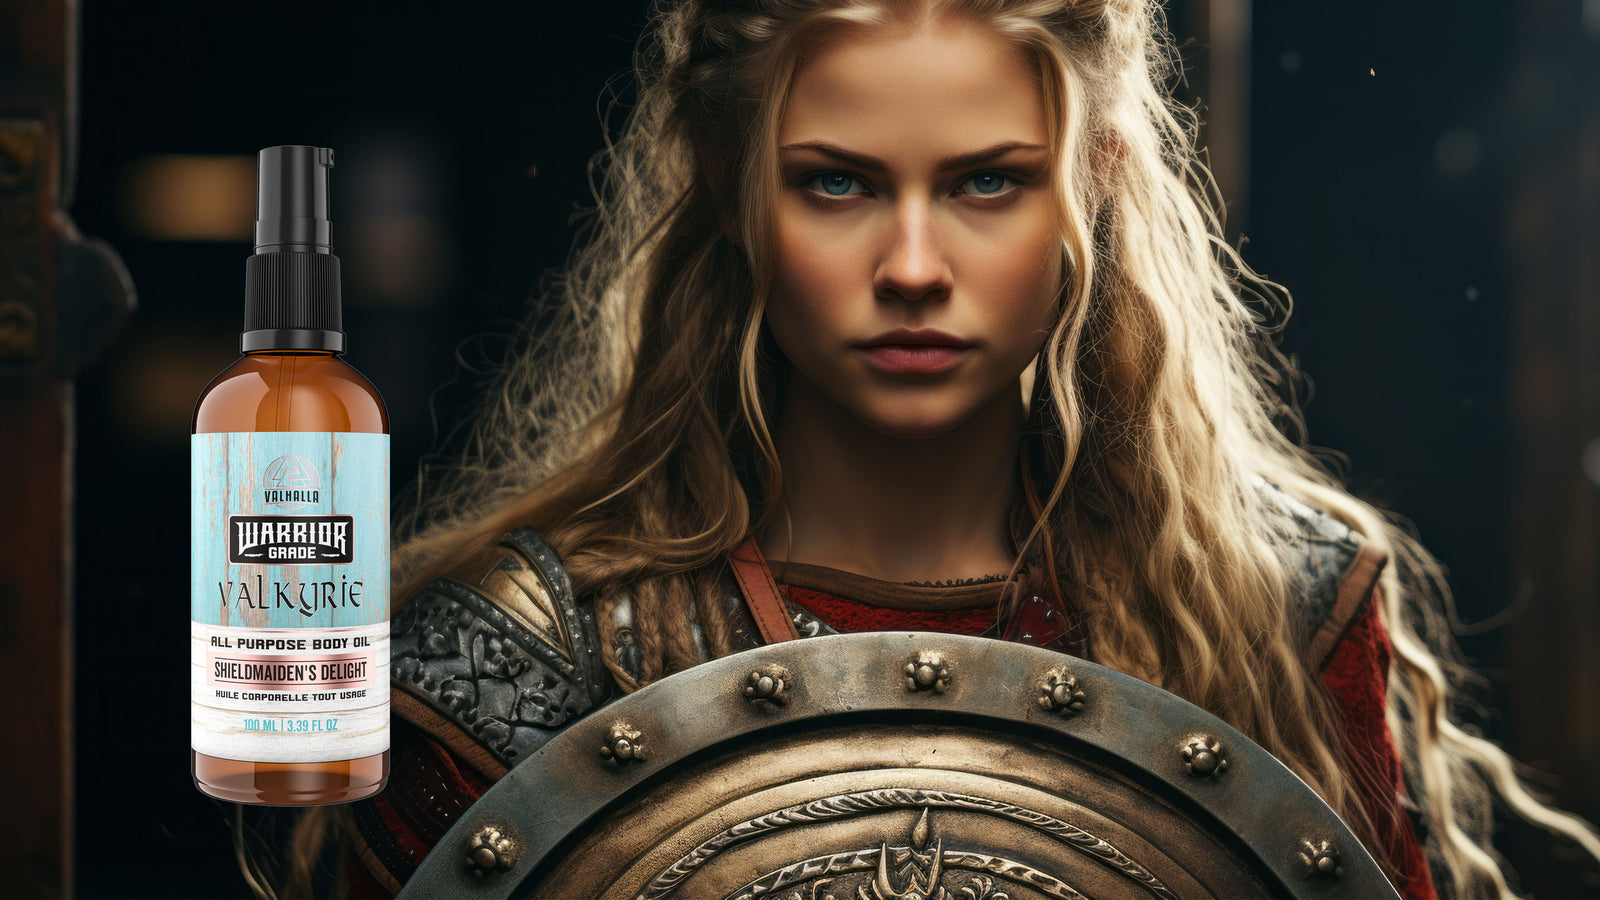 Valkyrie Body Oil made for Modern Day Valkyrie Warriors